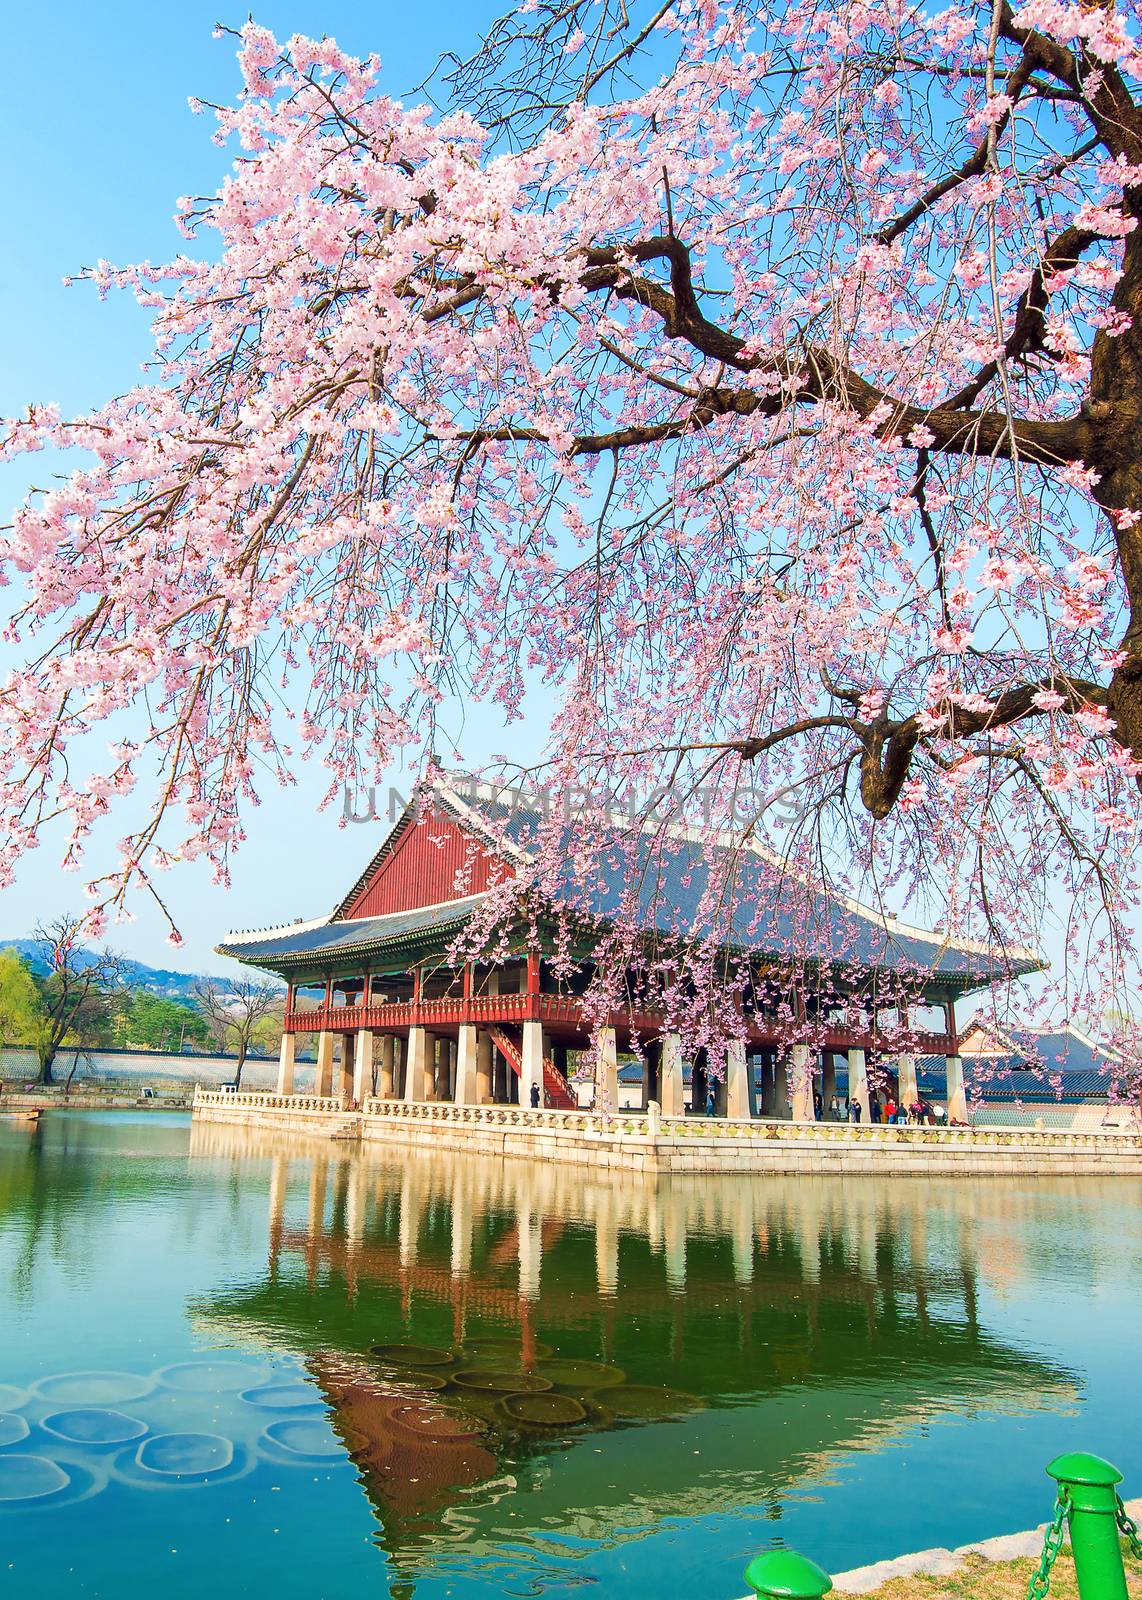 Gyeongbokgung Palace with cherry blossom in spring,Korea. by gutarphotoghaphy